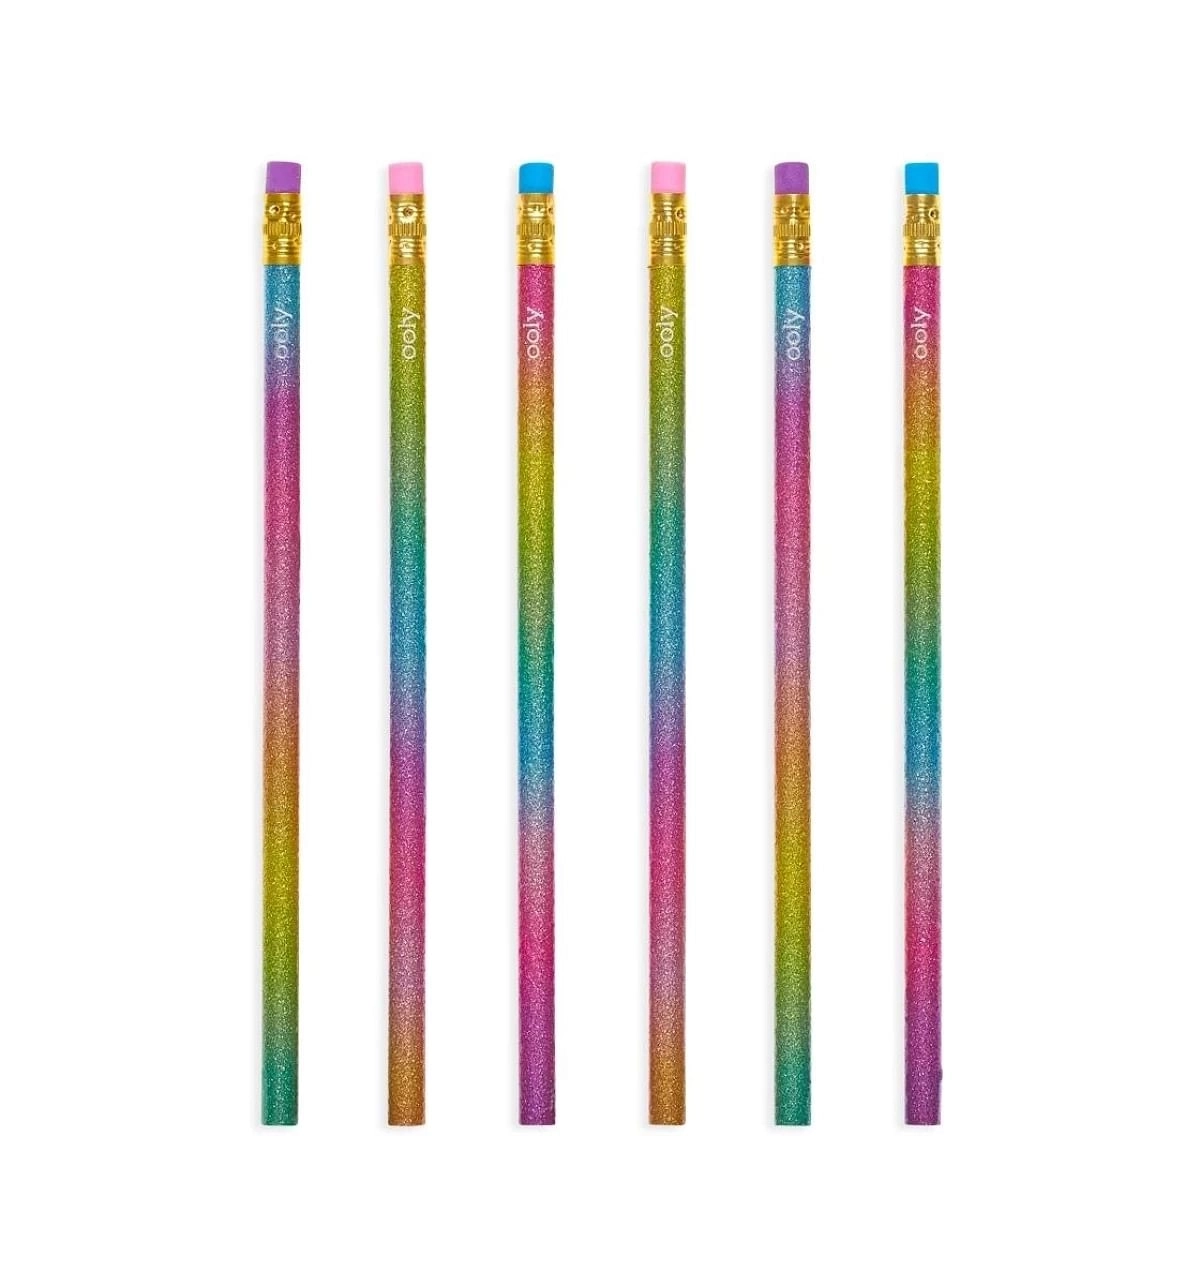 OOLY Oh My Glitter, Graphite Pencils set of 6 Multicolour 6Y+